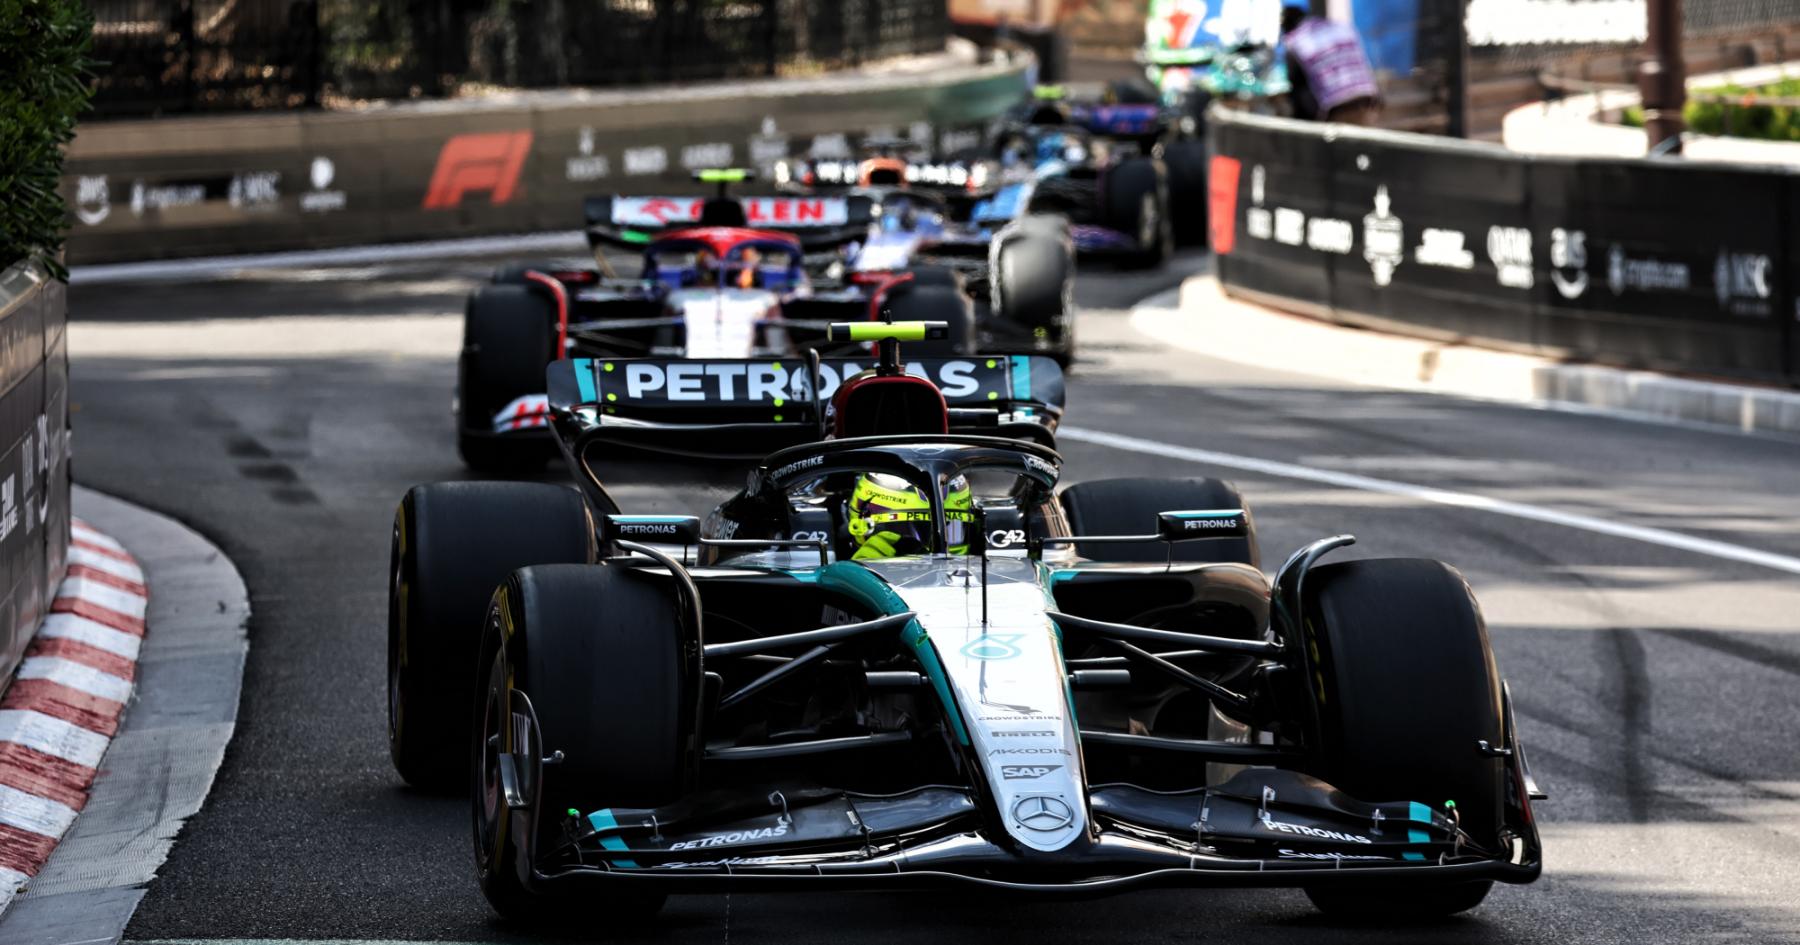 Decoding the Strategic Misstep: Wolff Analyzes Mercedes' Decision-Making in Crucial Hamilton Call